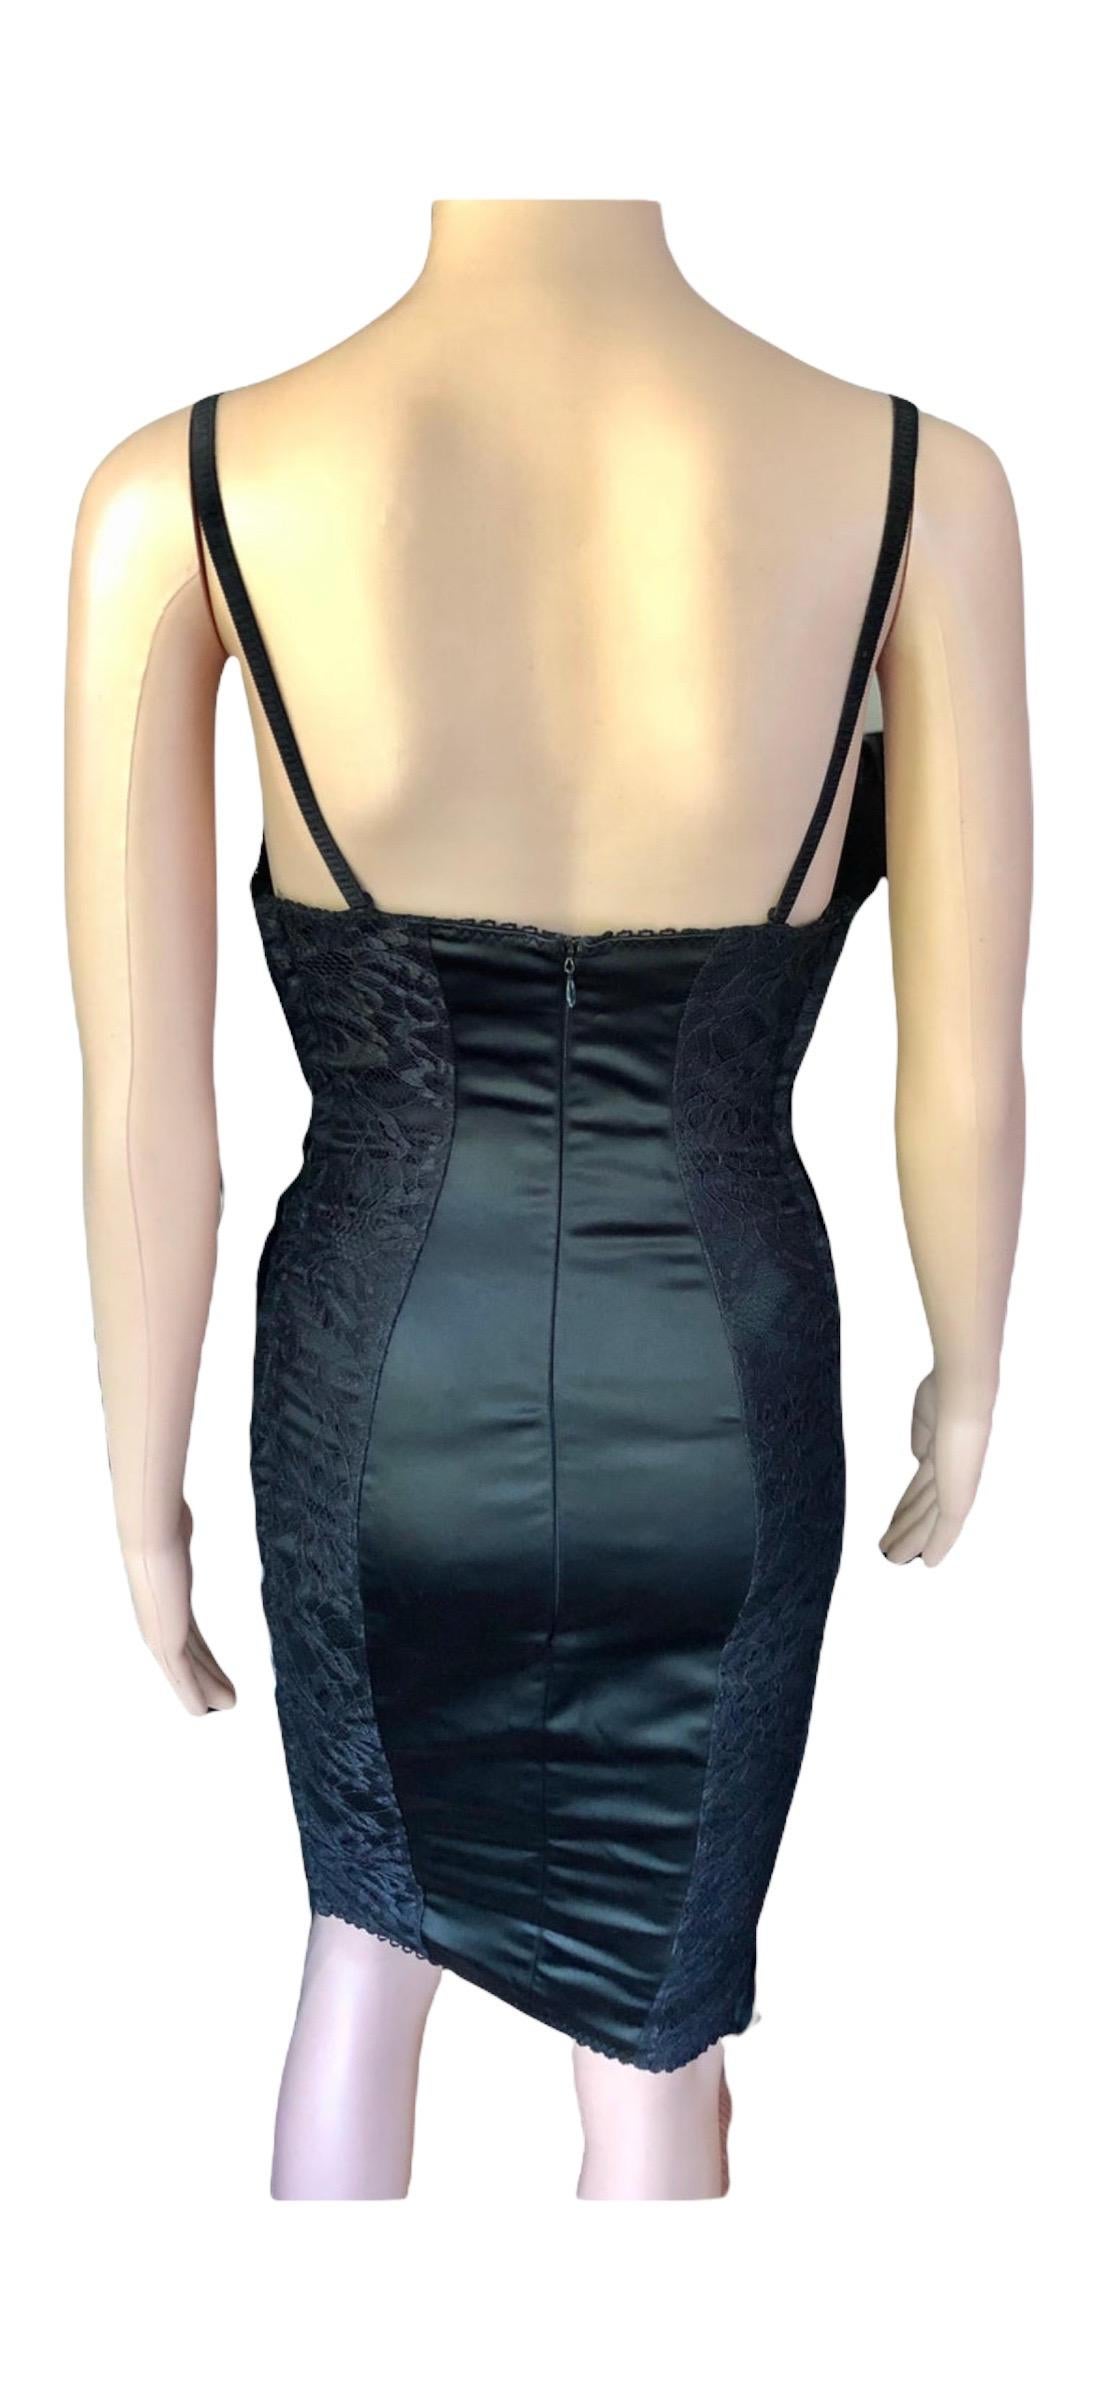 D&G by Dolce & Gabbana Lace Up Bodycon Black Dress For Sale 6